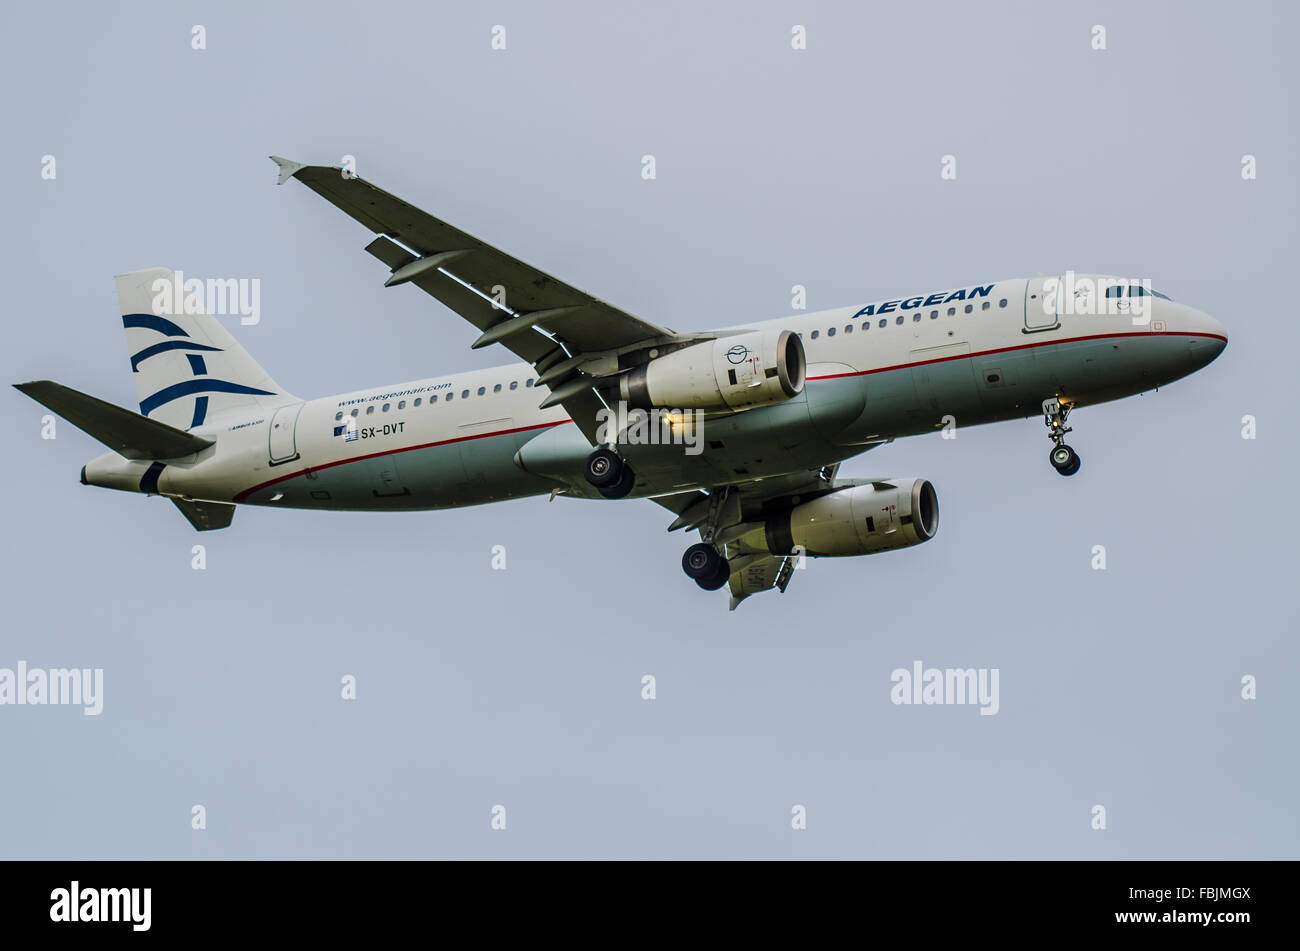 Aegean Airlines Airbus A320 -232 - SX-DVT coming in to land at London Heathrow Airport in overcast weather Stock Photo